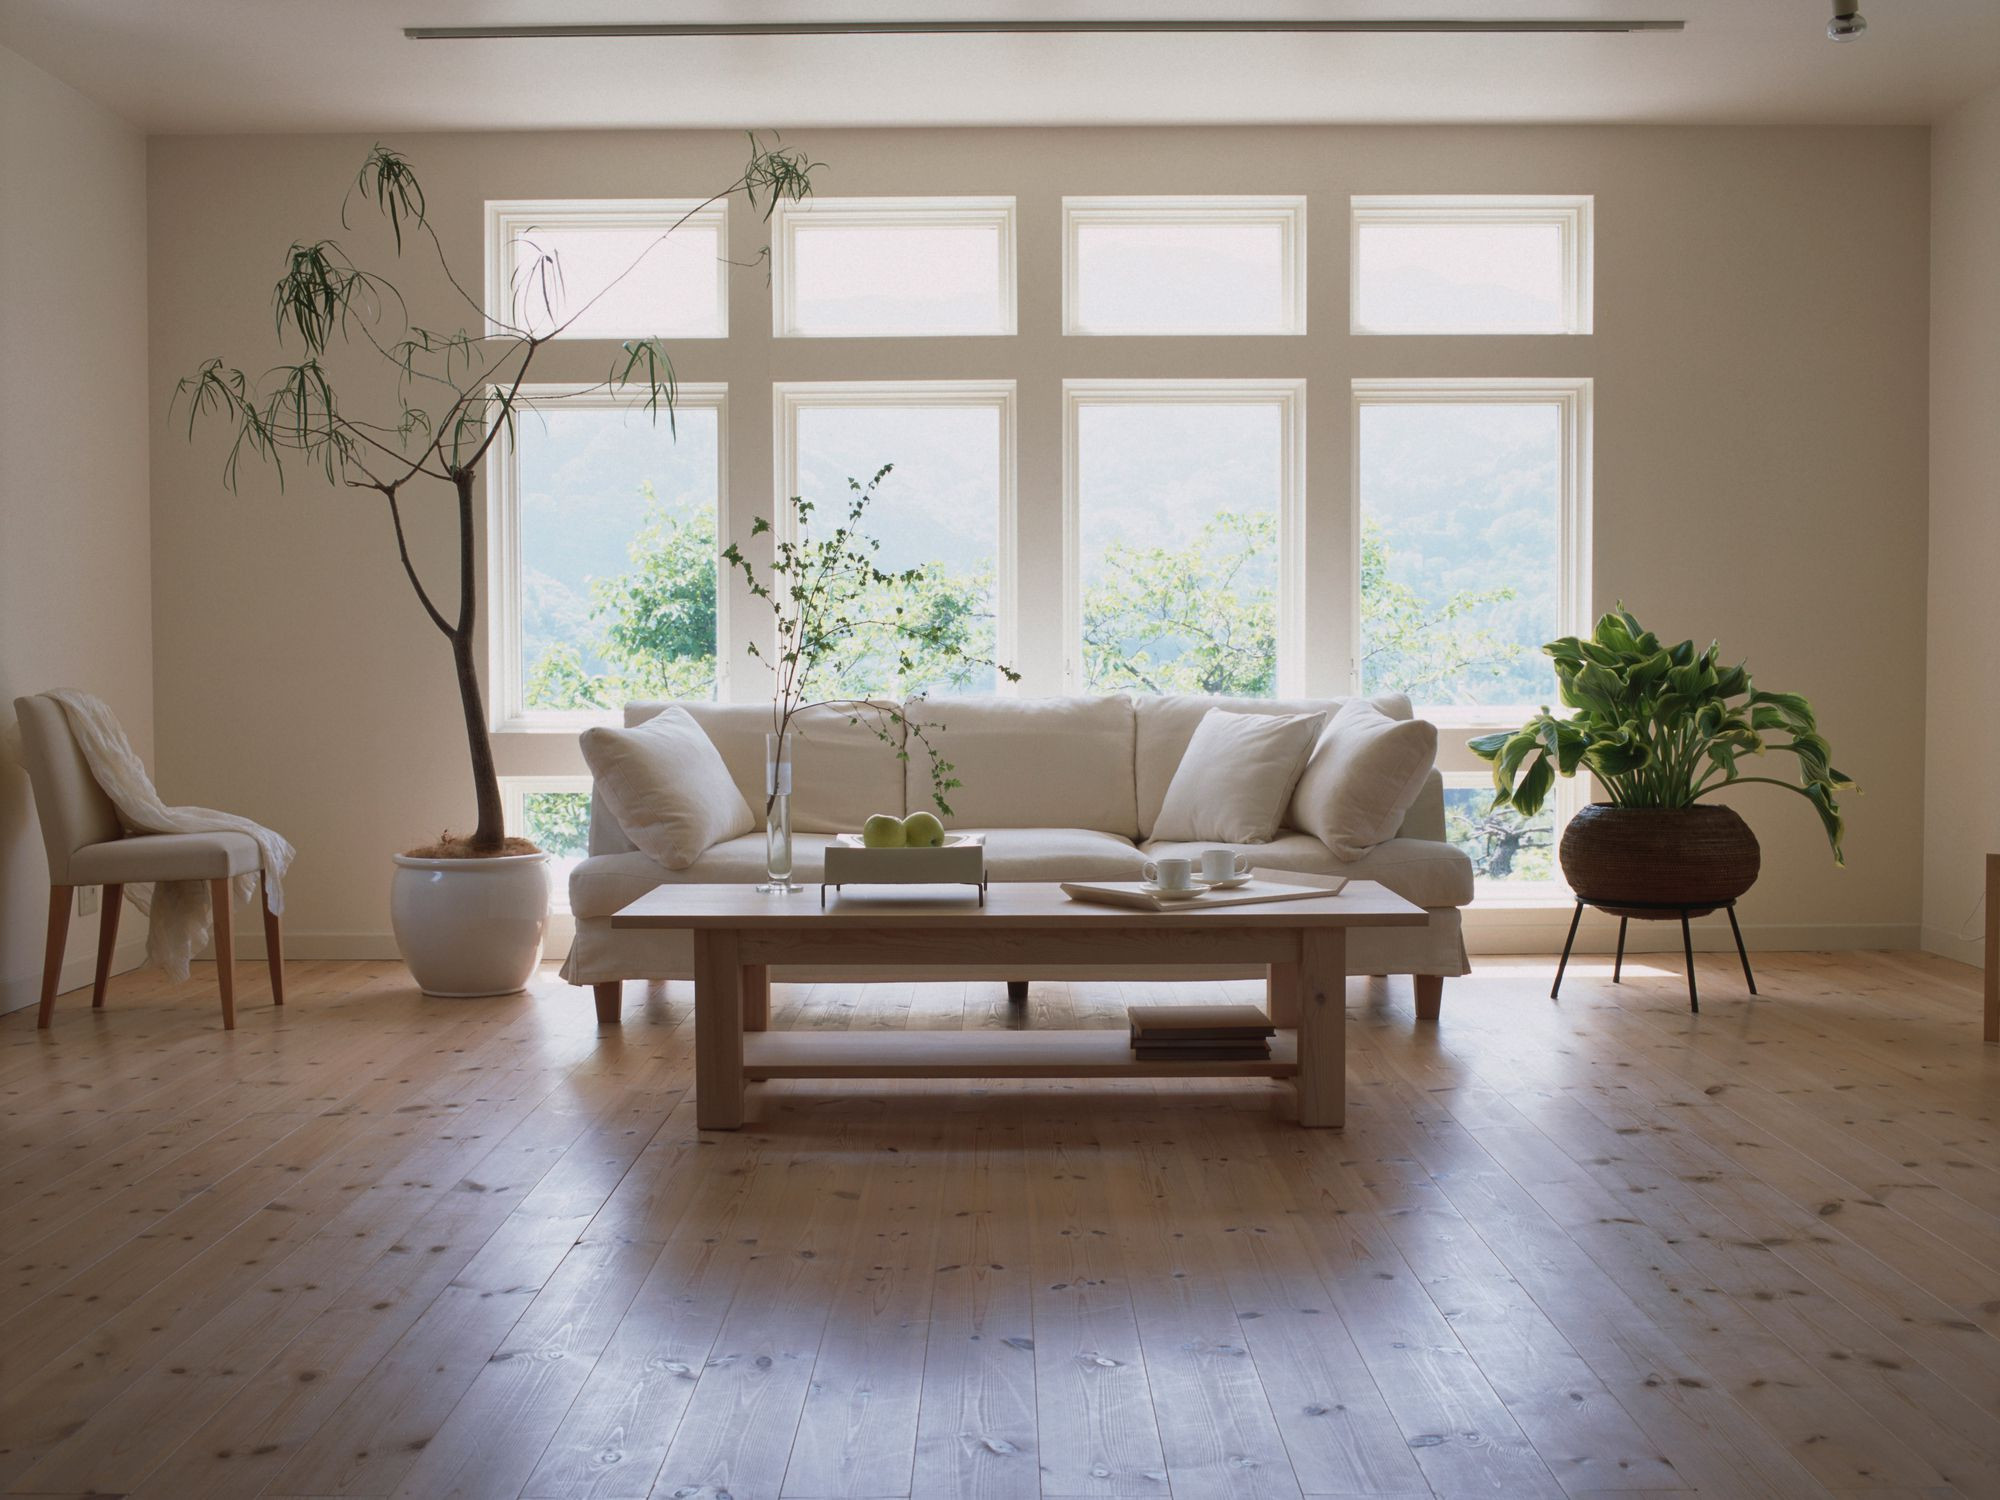 Laminate Vs Prefinished Hardwood Flooring Of Laminate Flooring Pros and Cons Intended for Living Room Laminate Floor Gettyimages Dexph070 001 58b5cc793df78cdcd8be2938